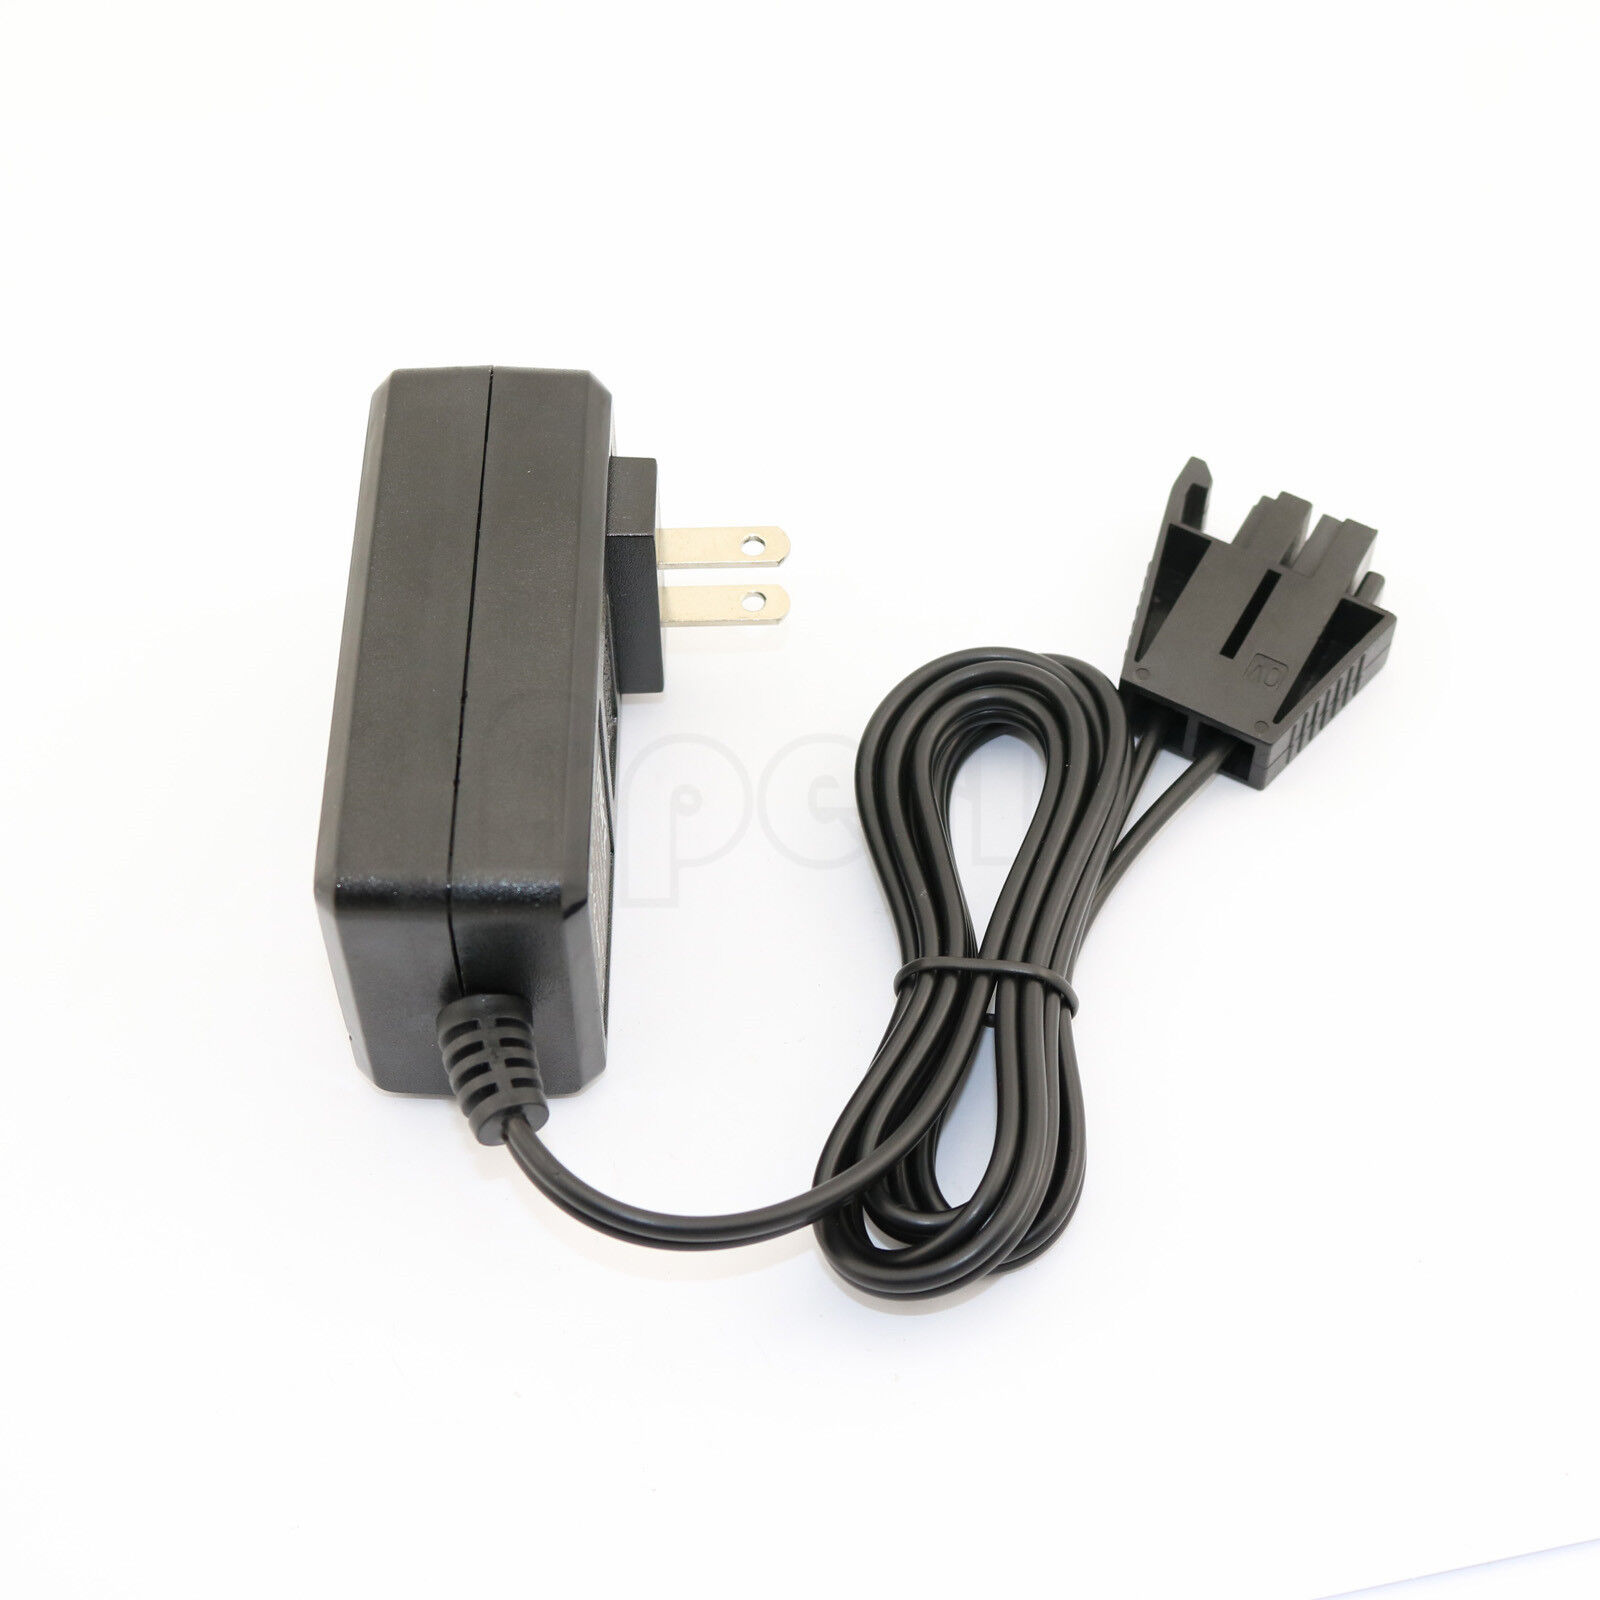 6 VOLT 6 V AC POWER ADAPTER BATTERY CHARGER For PEG PEREGO RIDE ON TOYS 6 VOLT 6 V AC POWER ADAPTER BATTERY CHARGER For